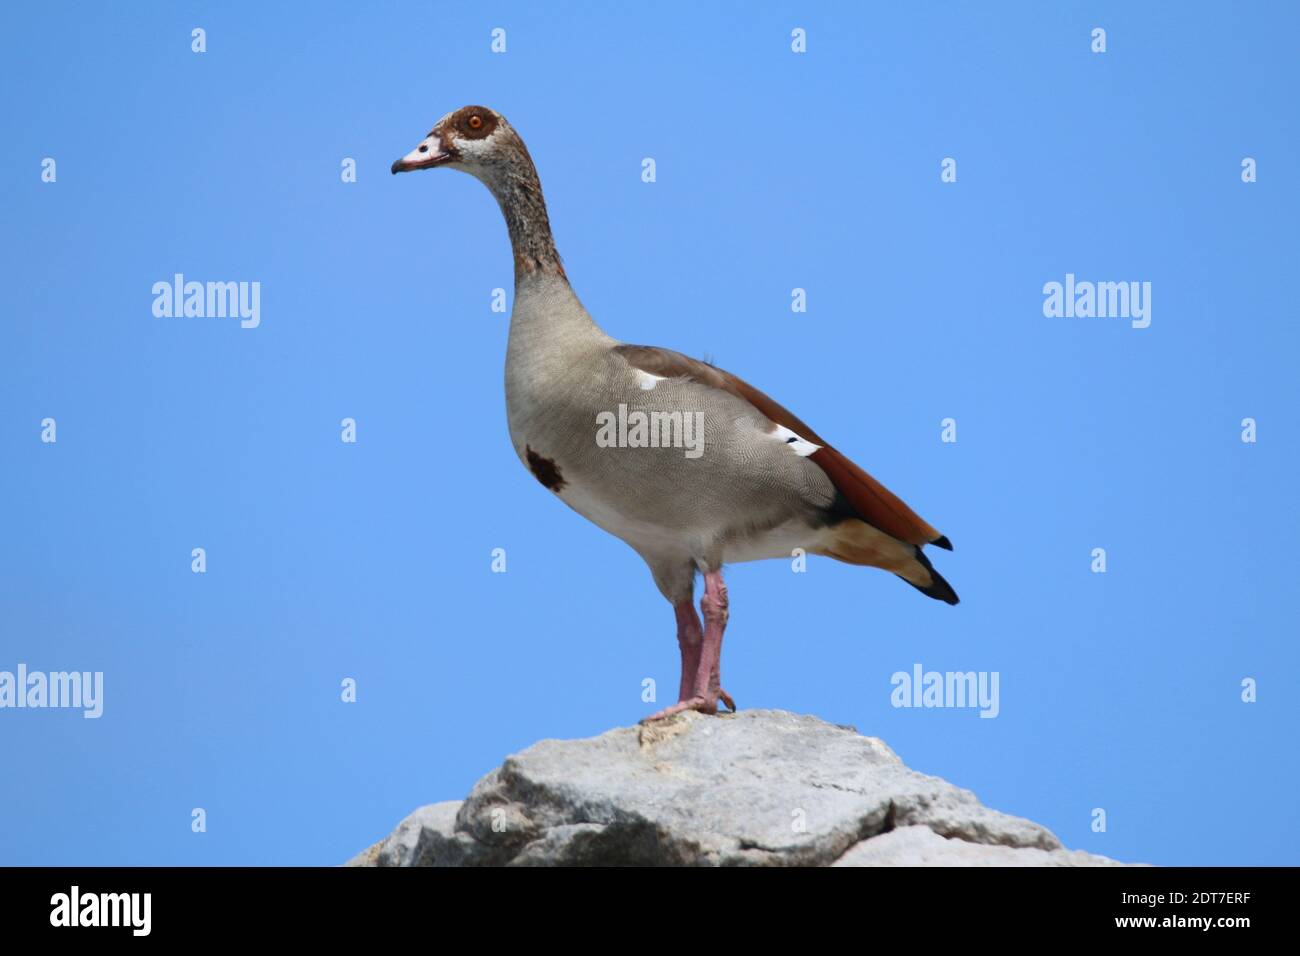 Egyptian goose (Alopochen aegyptiacus), peering from a small hill, side view, South Africa Stock Photo